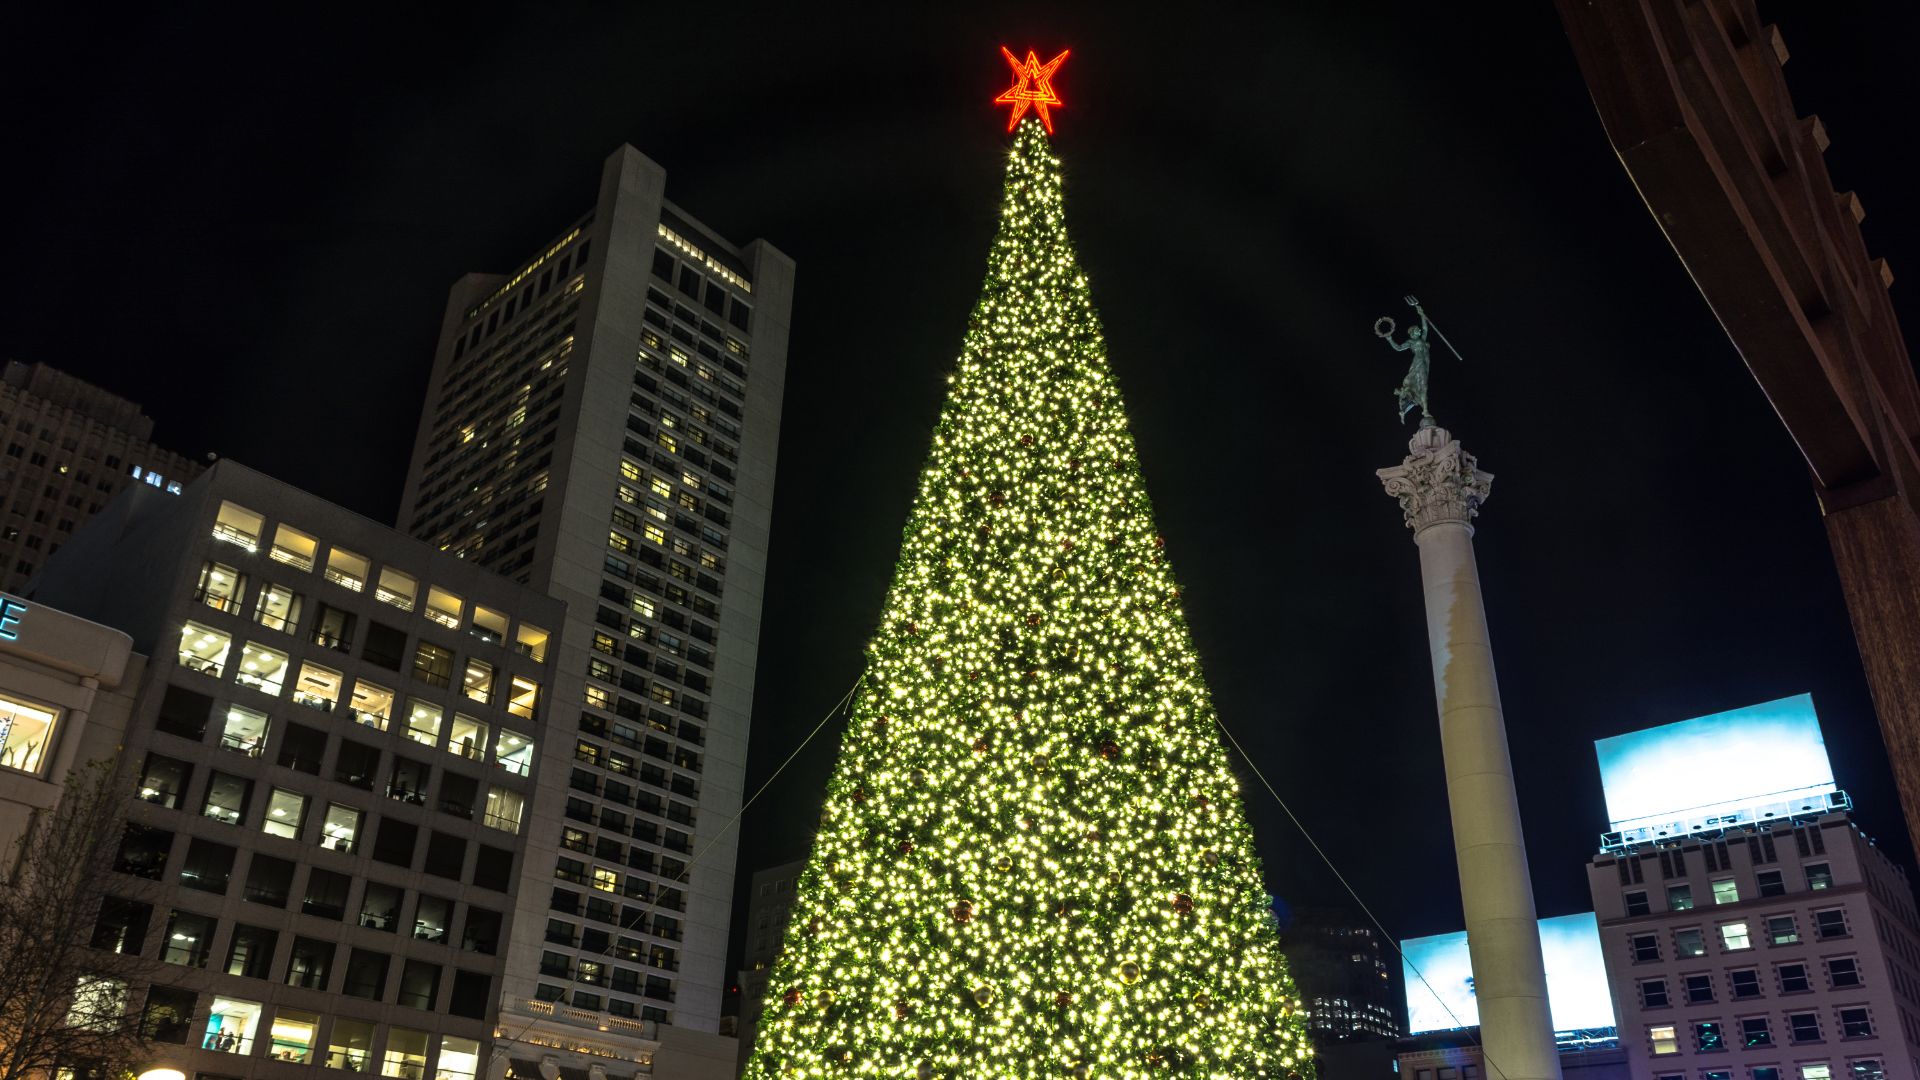 a giant lit-up outdoor Christmas tree next to high rise clean building